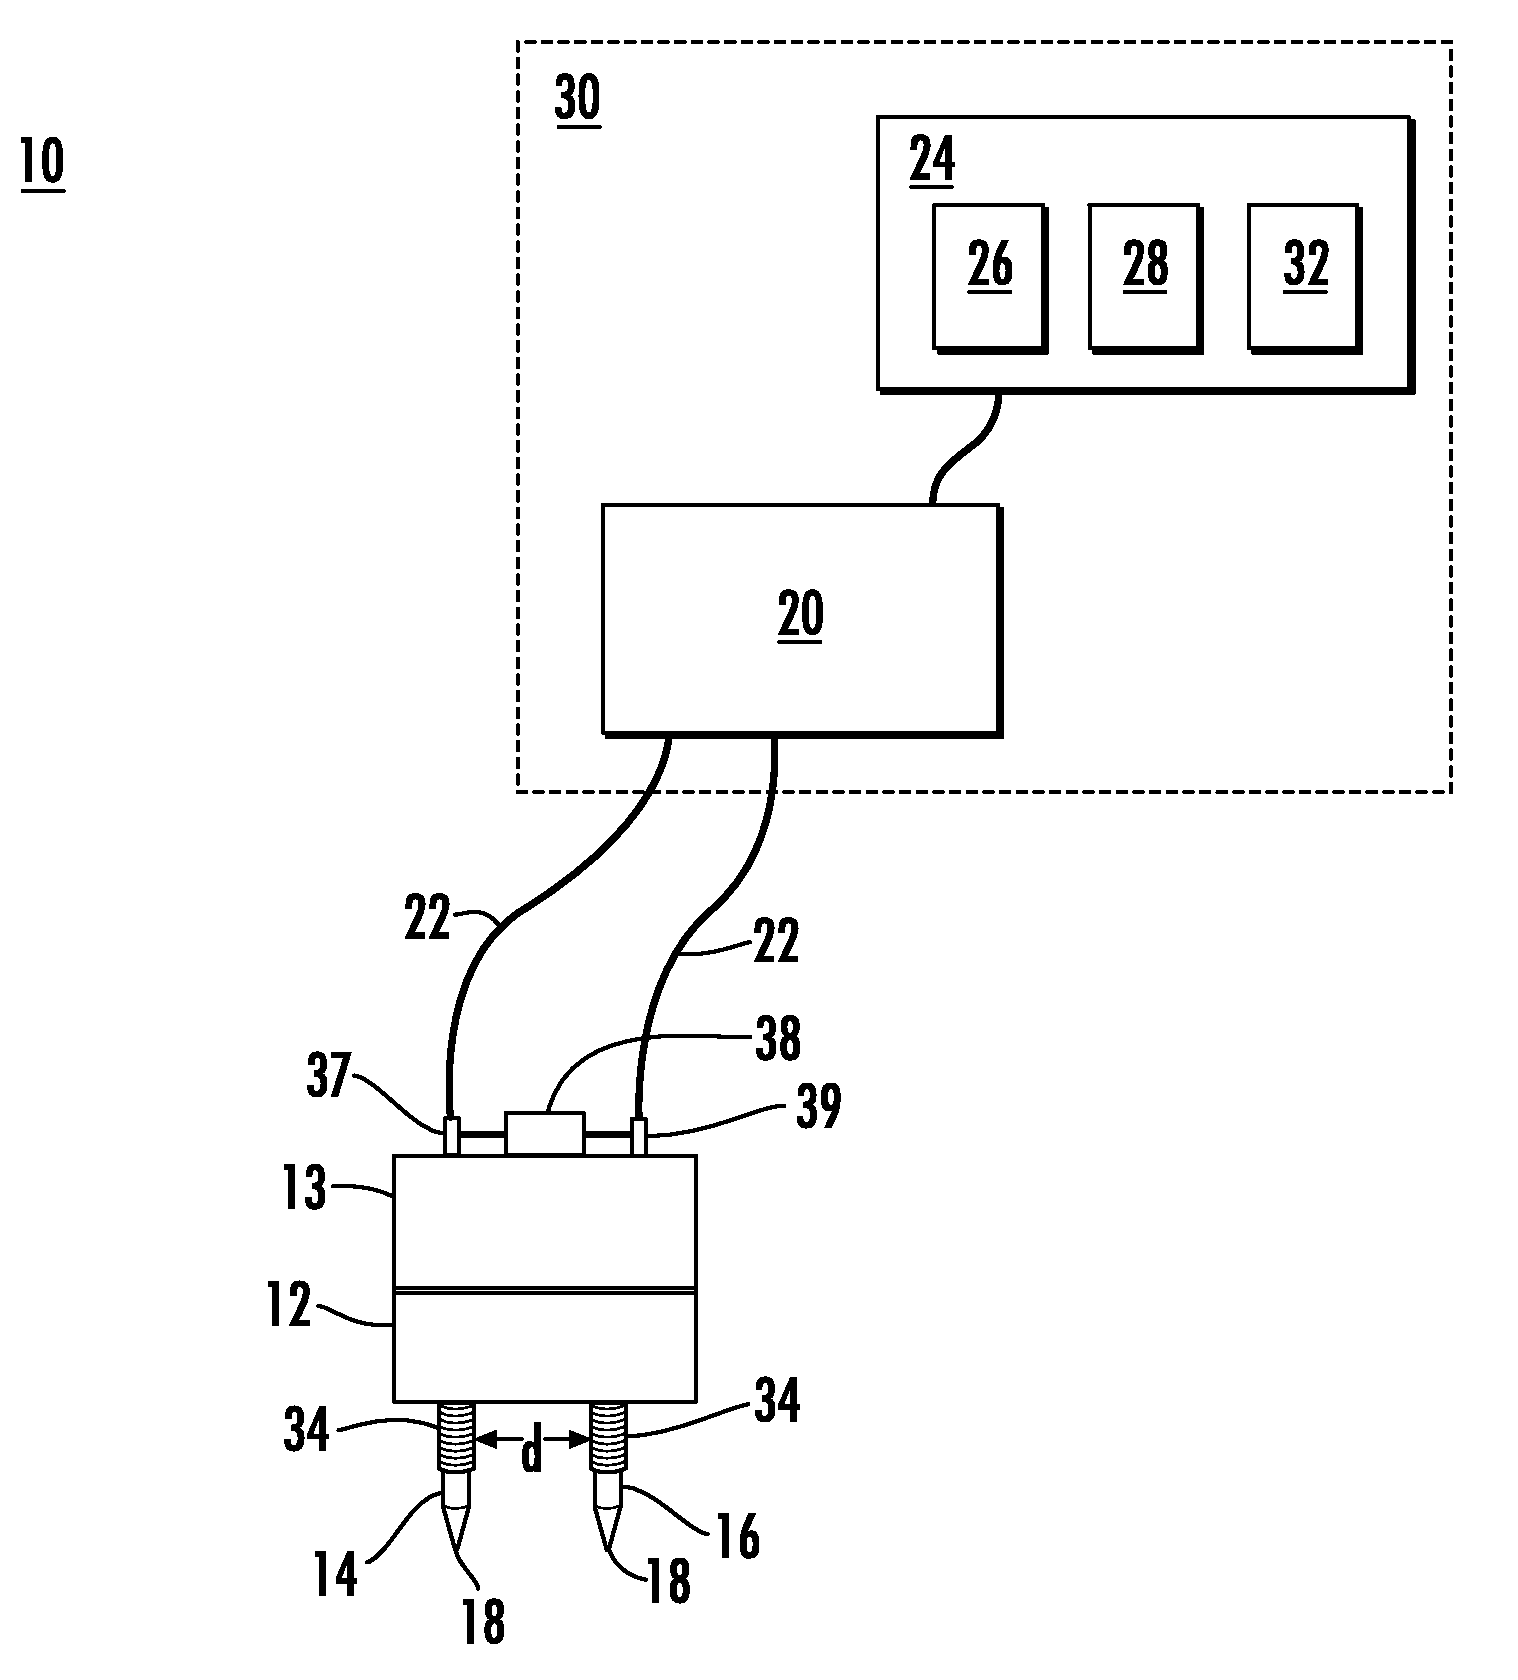 System and method for applying plasma sparks to tissue